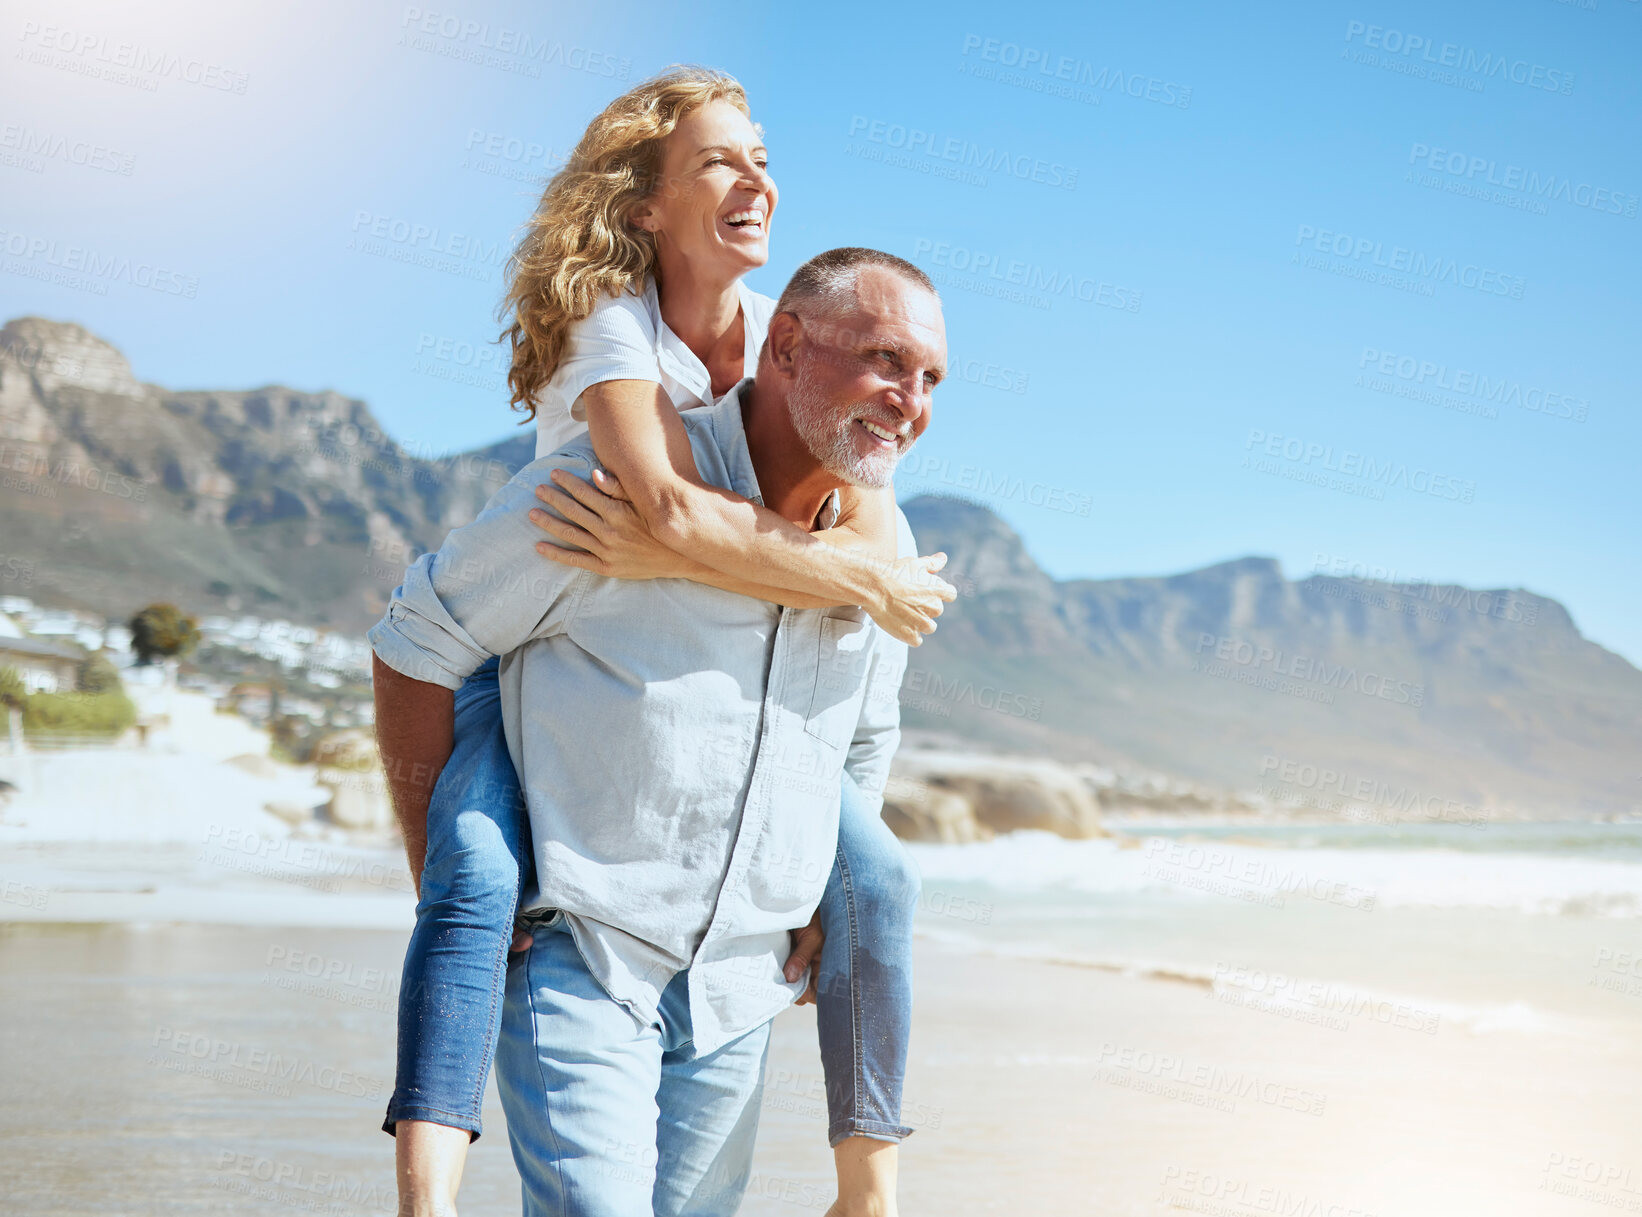 Buy stock photo Happy mature couple enjoying vacation by the beach. Active senior husband giving his wife a piggyback ride while enjoying a sunny day outdoors. Energetic man and woman having fun while on holiday